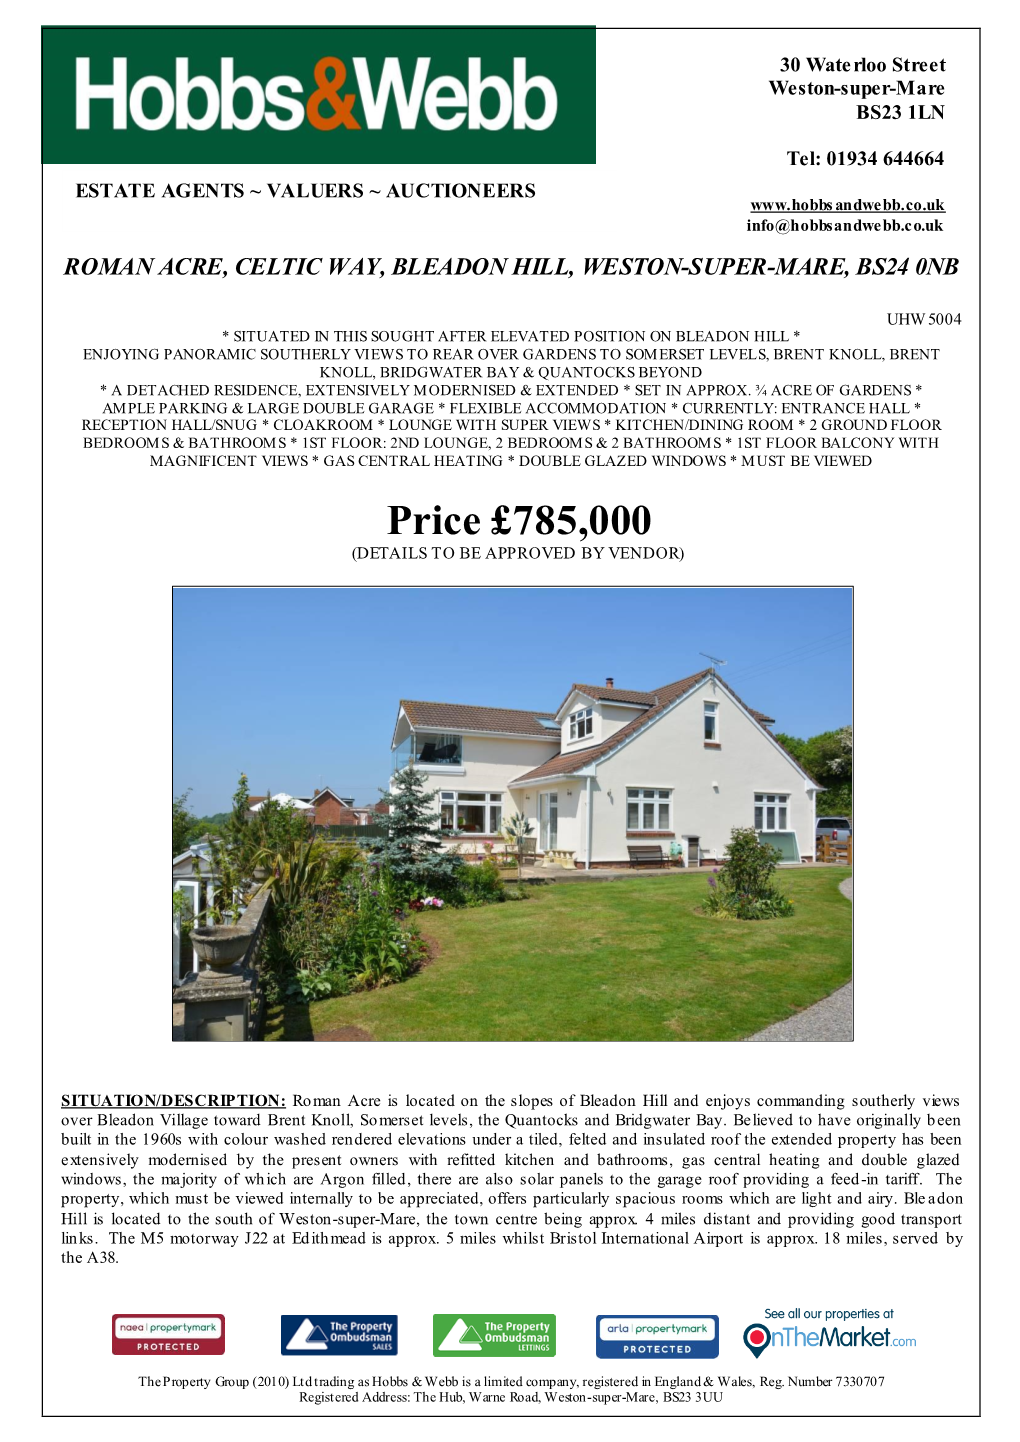 Price £785,000 (DETAILS to BE APPROVED by VENDOR)